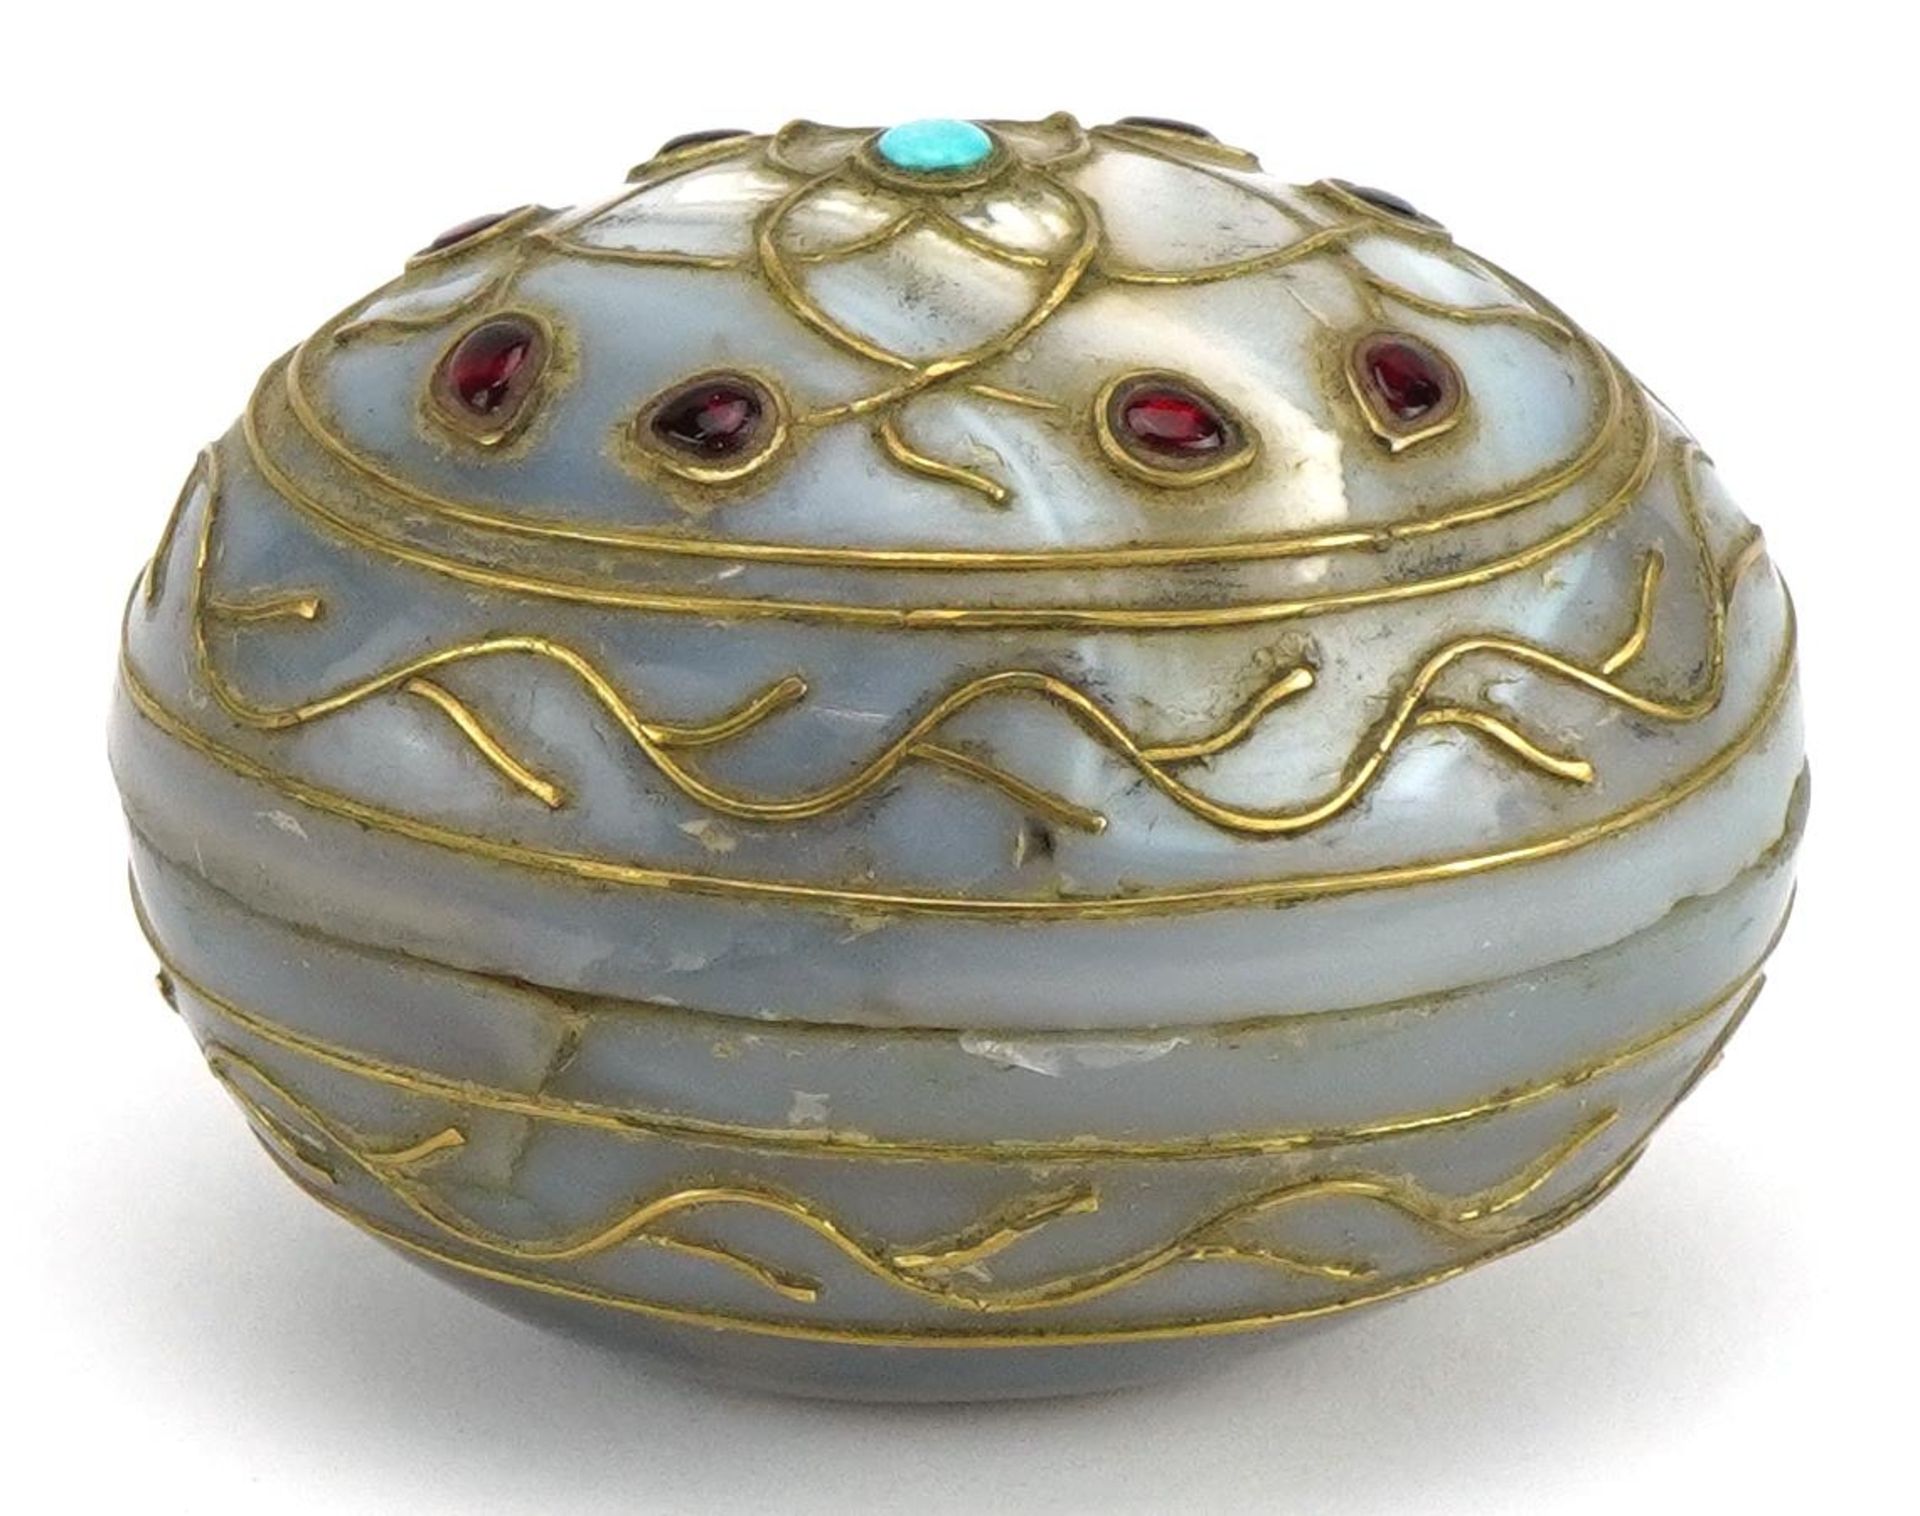 Islamic agate egg shaped box and cover inlaid with stone and metal inlay, 6cm in length